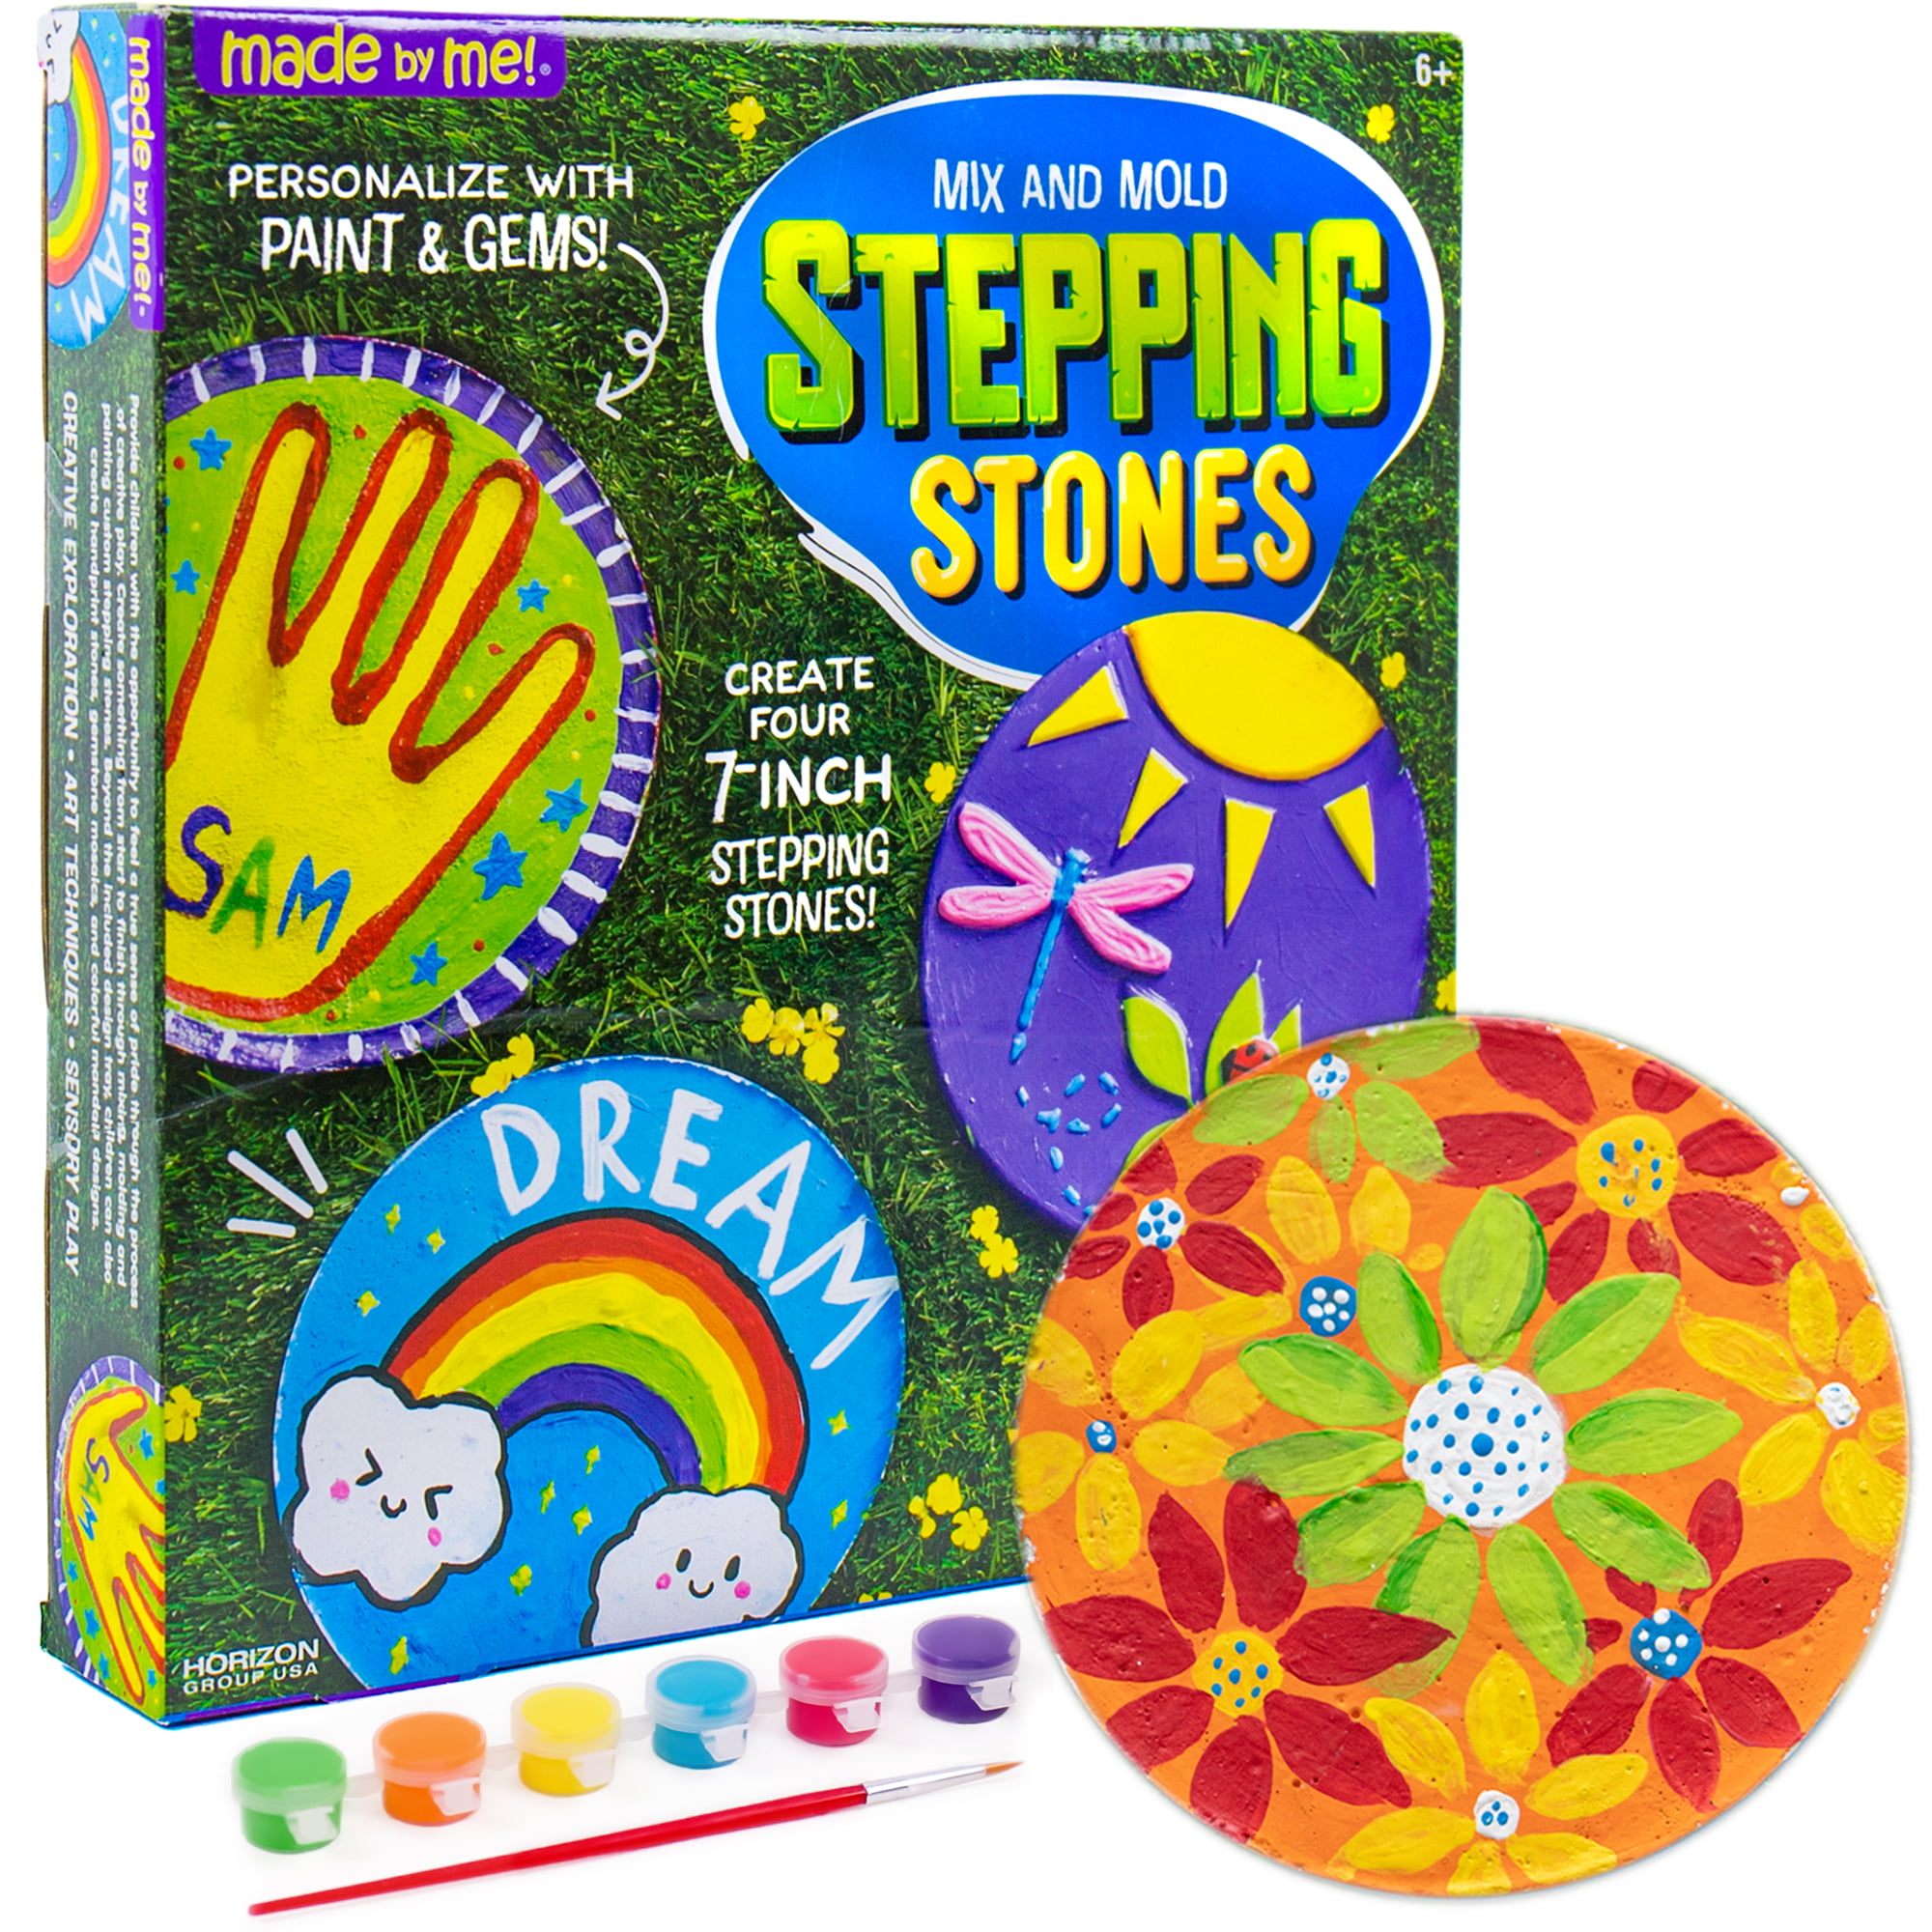 3 in 1 Stepping Stones Craft KitMakes 3 Stepping Stones 